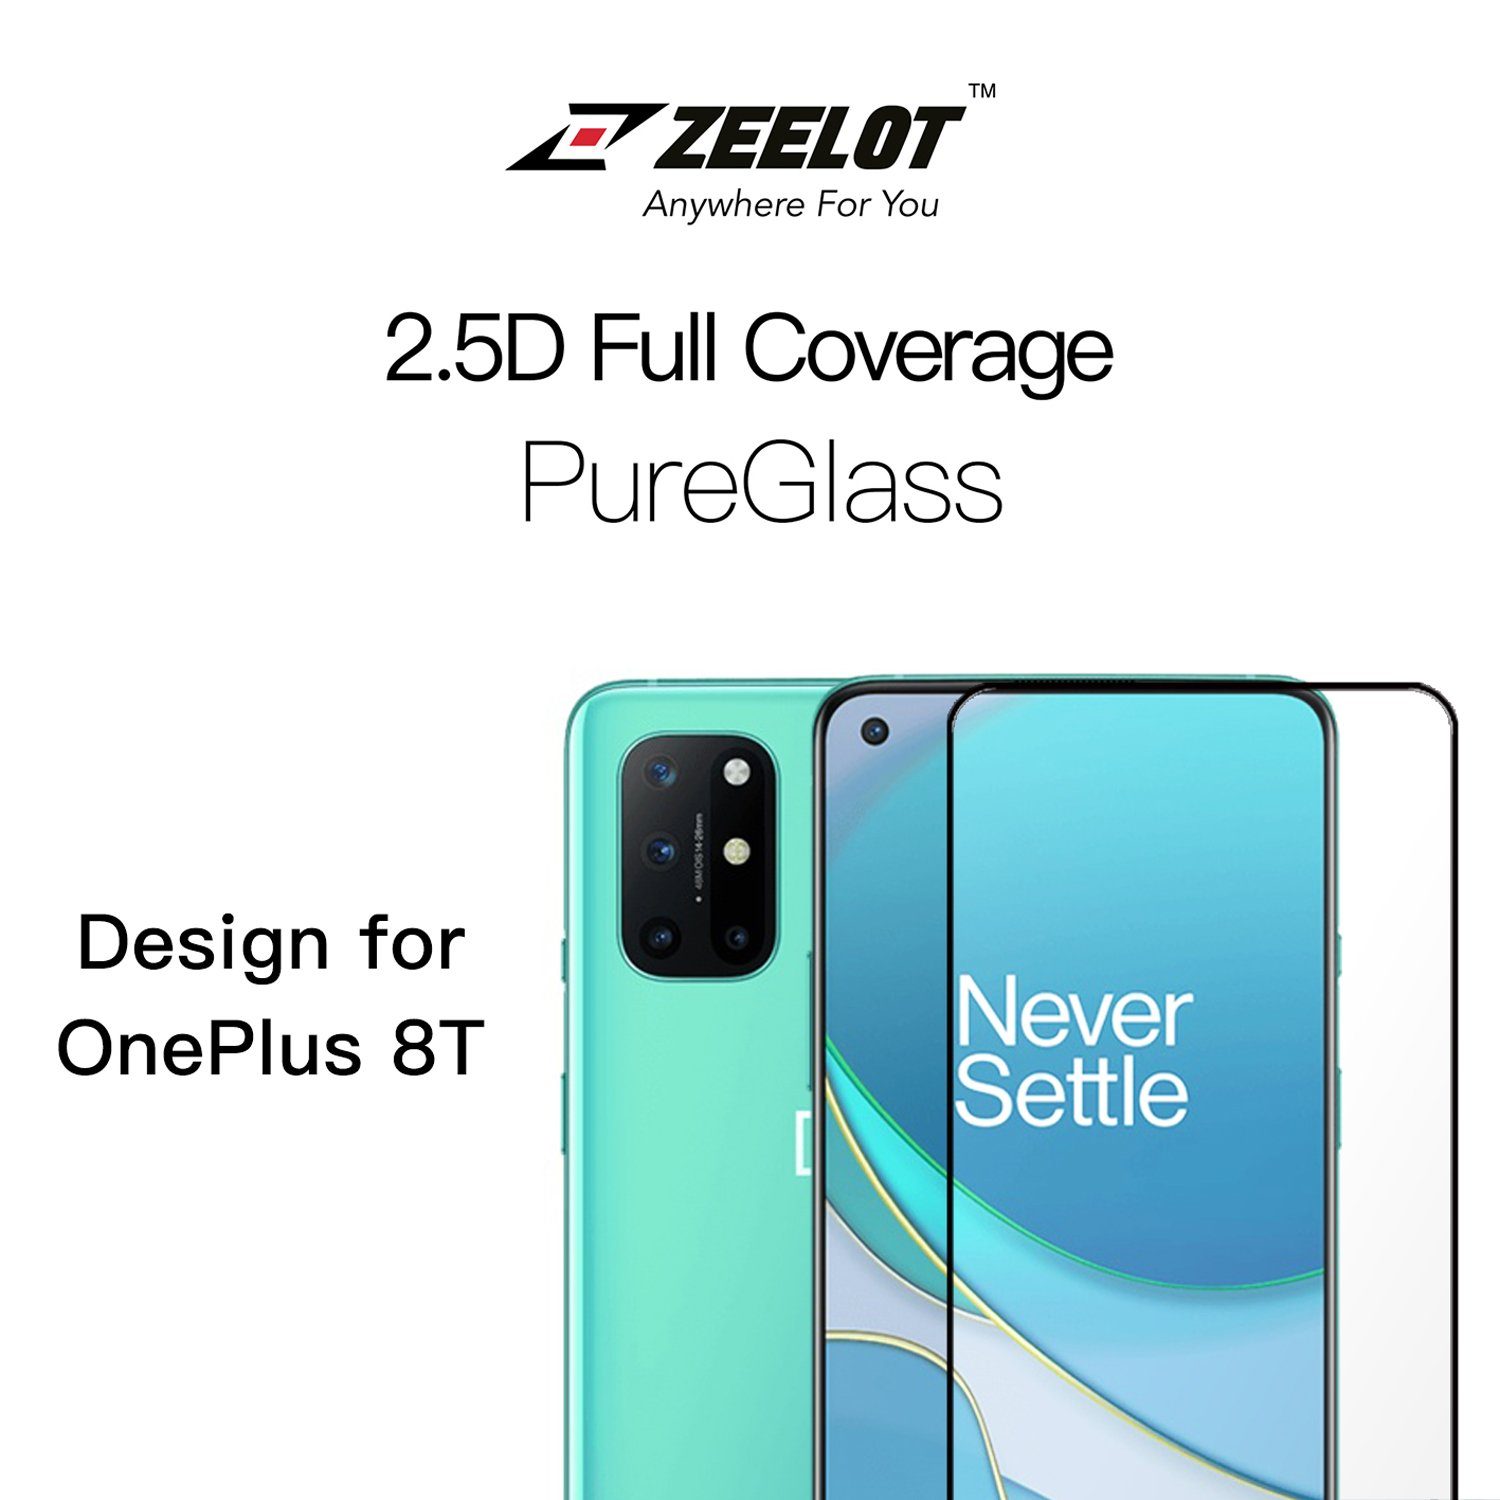 ZEELOT PureShield 2.5D Tempered Glass Screen Protector for Oneplus 8T, Clear Oneplus 8T ZEELOT 